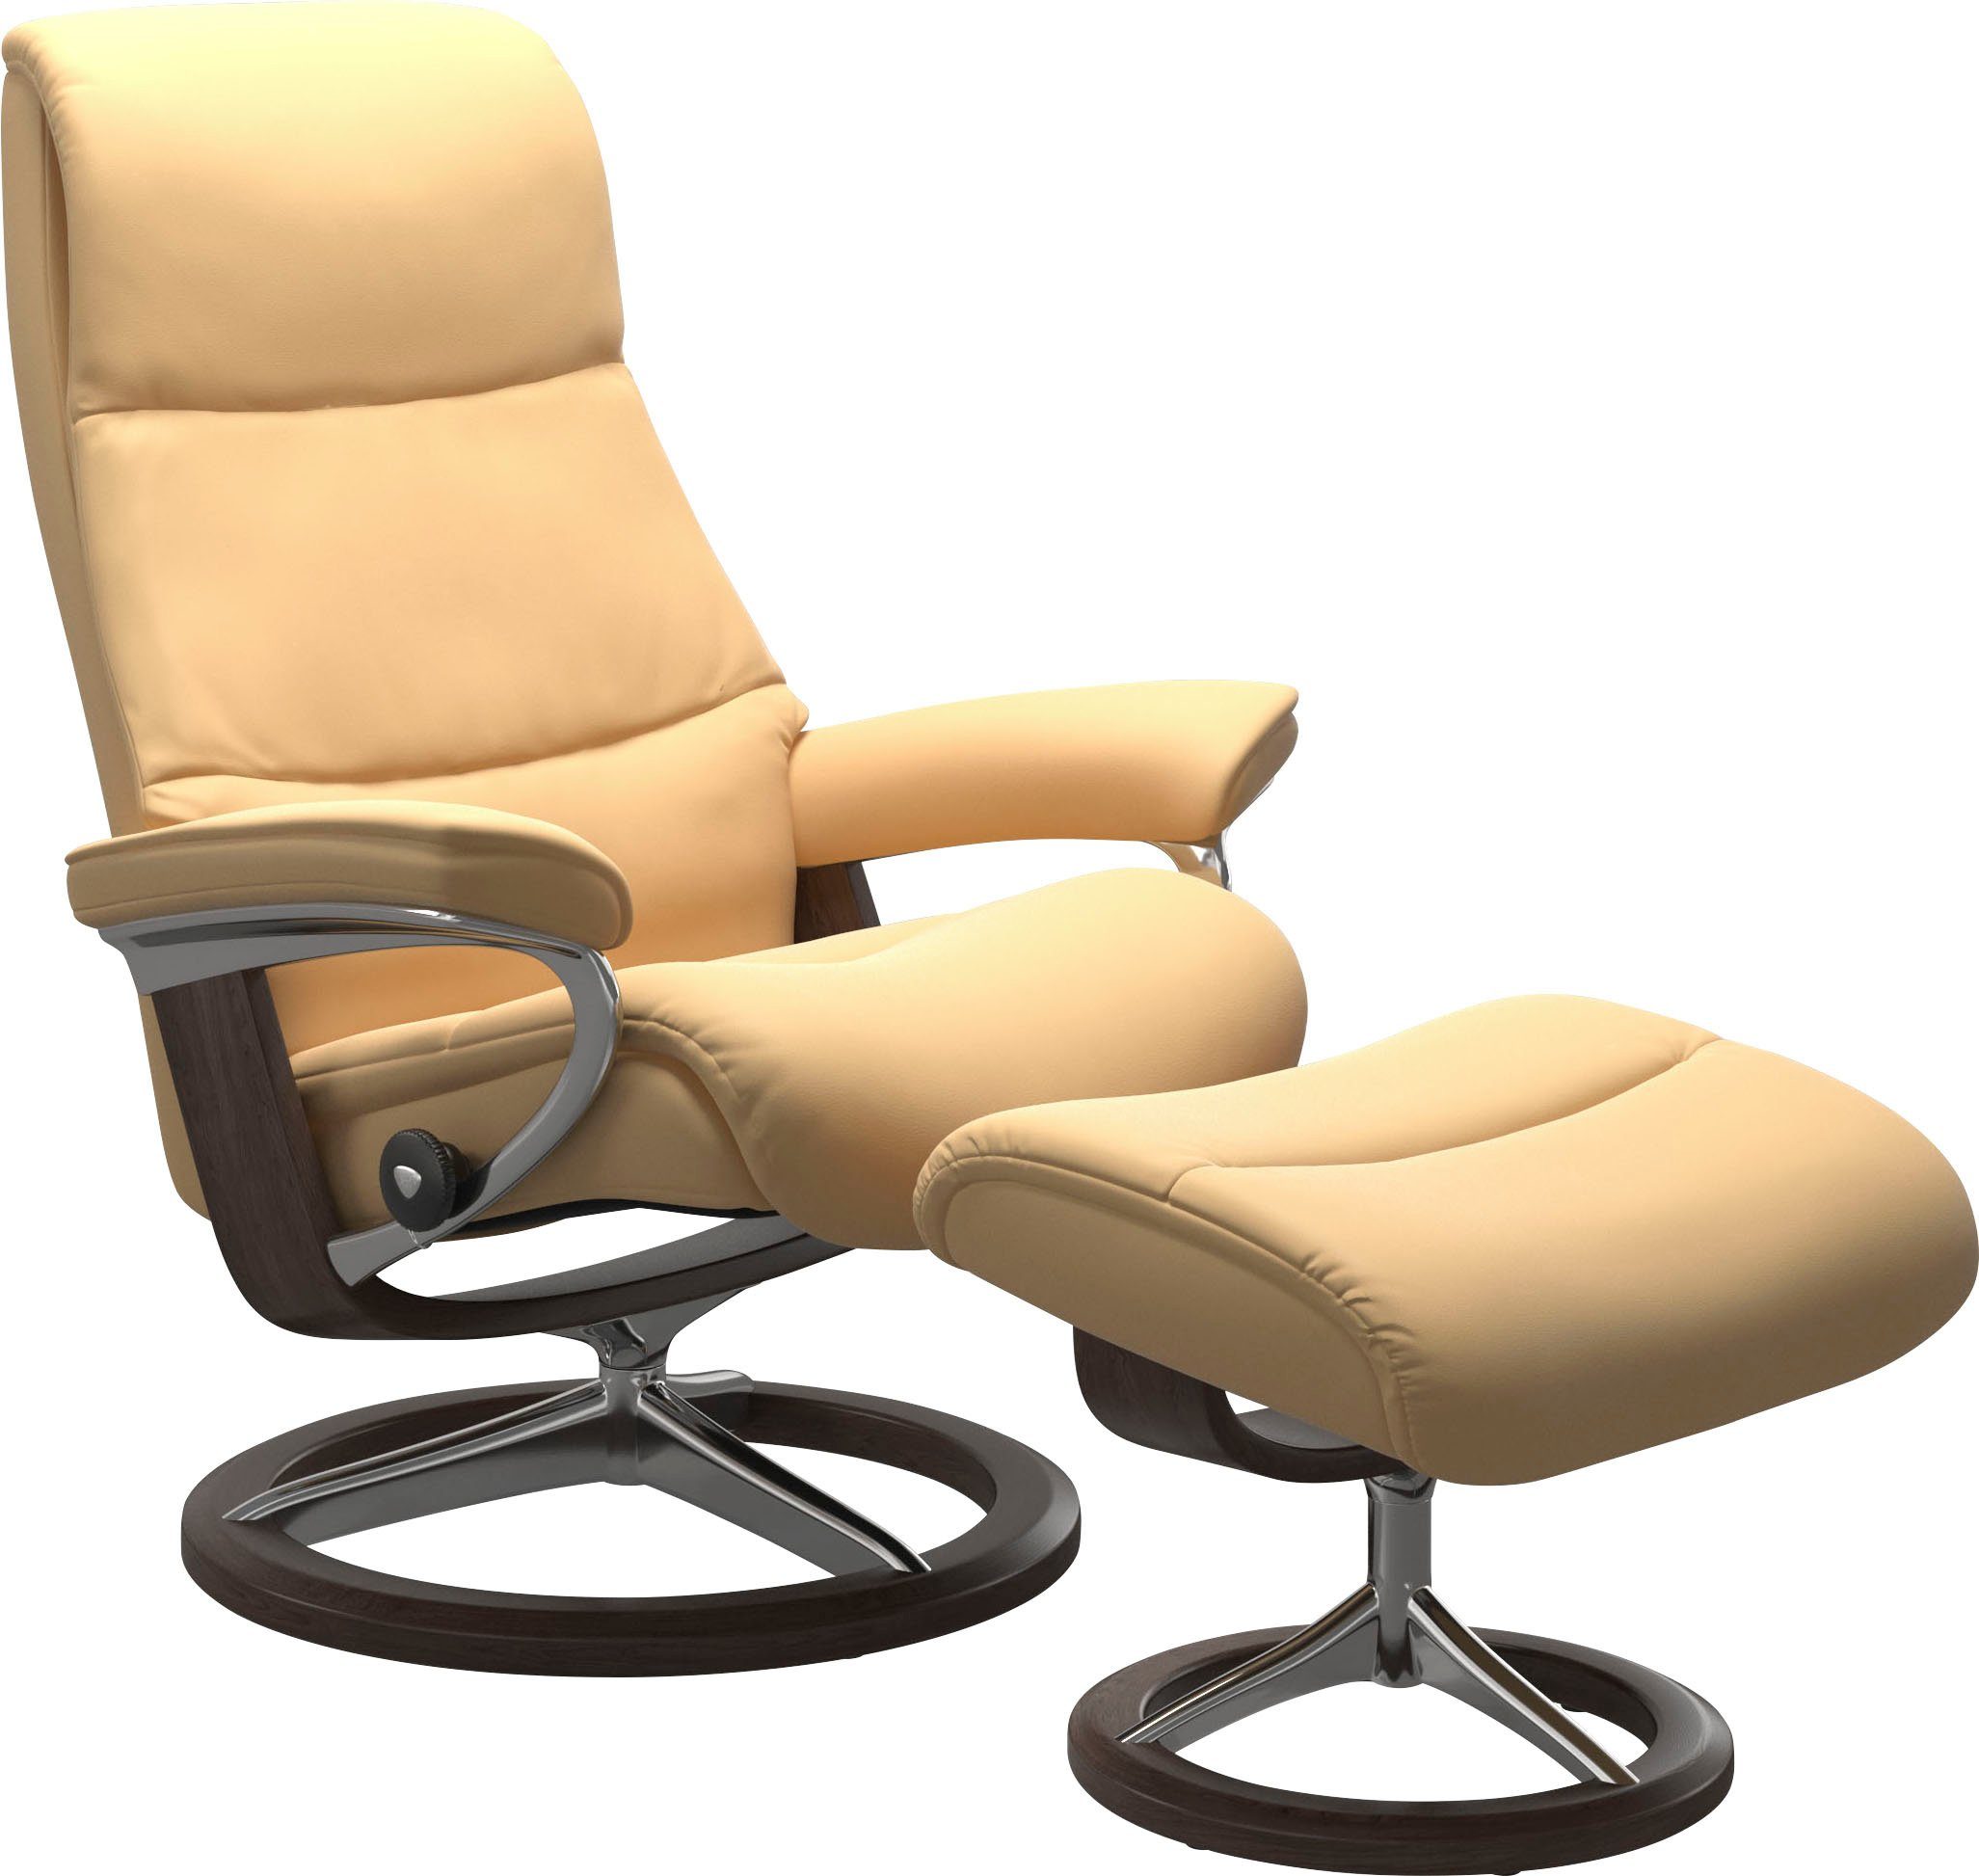 Signature View, Größe S,Gestell Base, Relaxsessel Stressless® mit Wenge